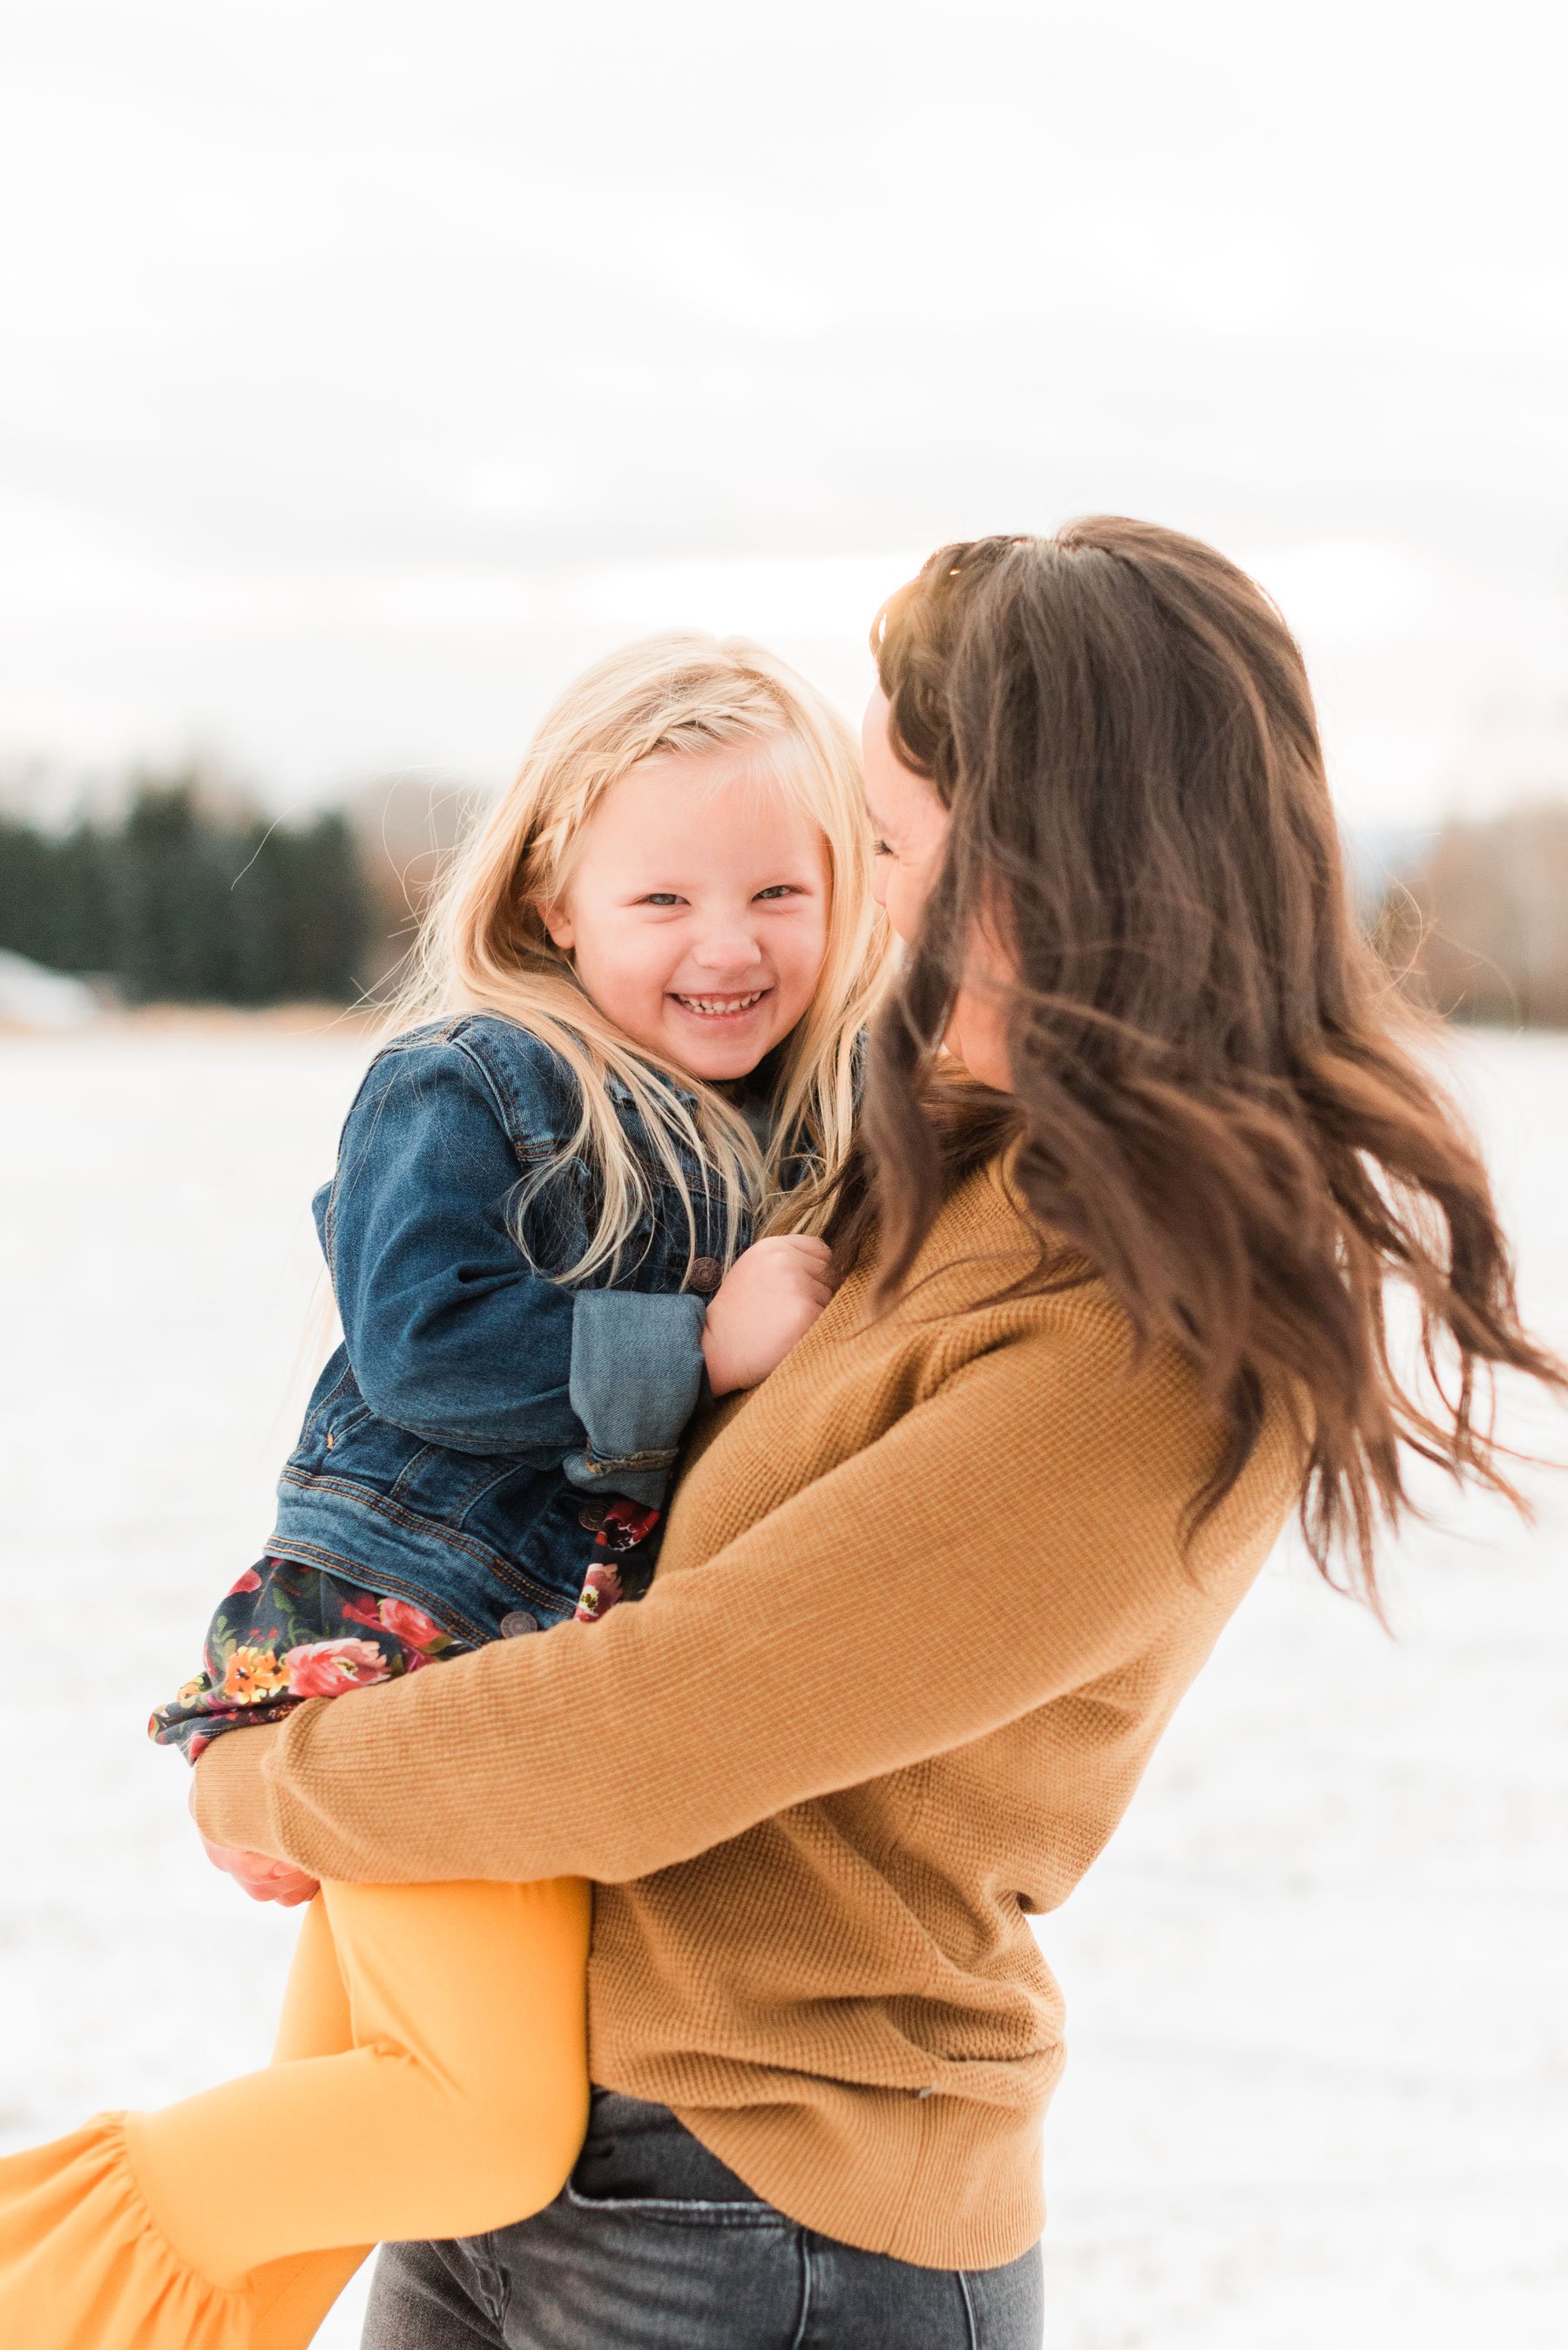  A mother spins her young daughter around in an action shot captured by Atlanta-based photographer, Jacquie Erickson. Spinning photo Mommy and me&nbsp; #motherdaughterphotos #atlantafamilyphotographer #familiesofinstagram #personalityshot 